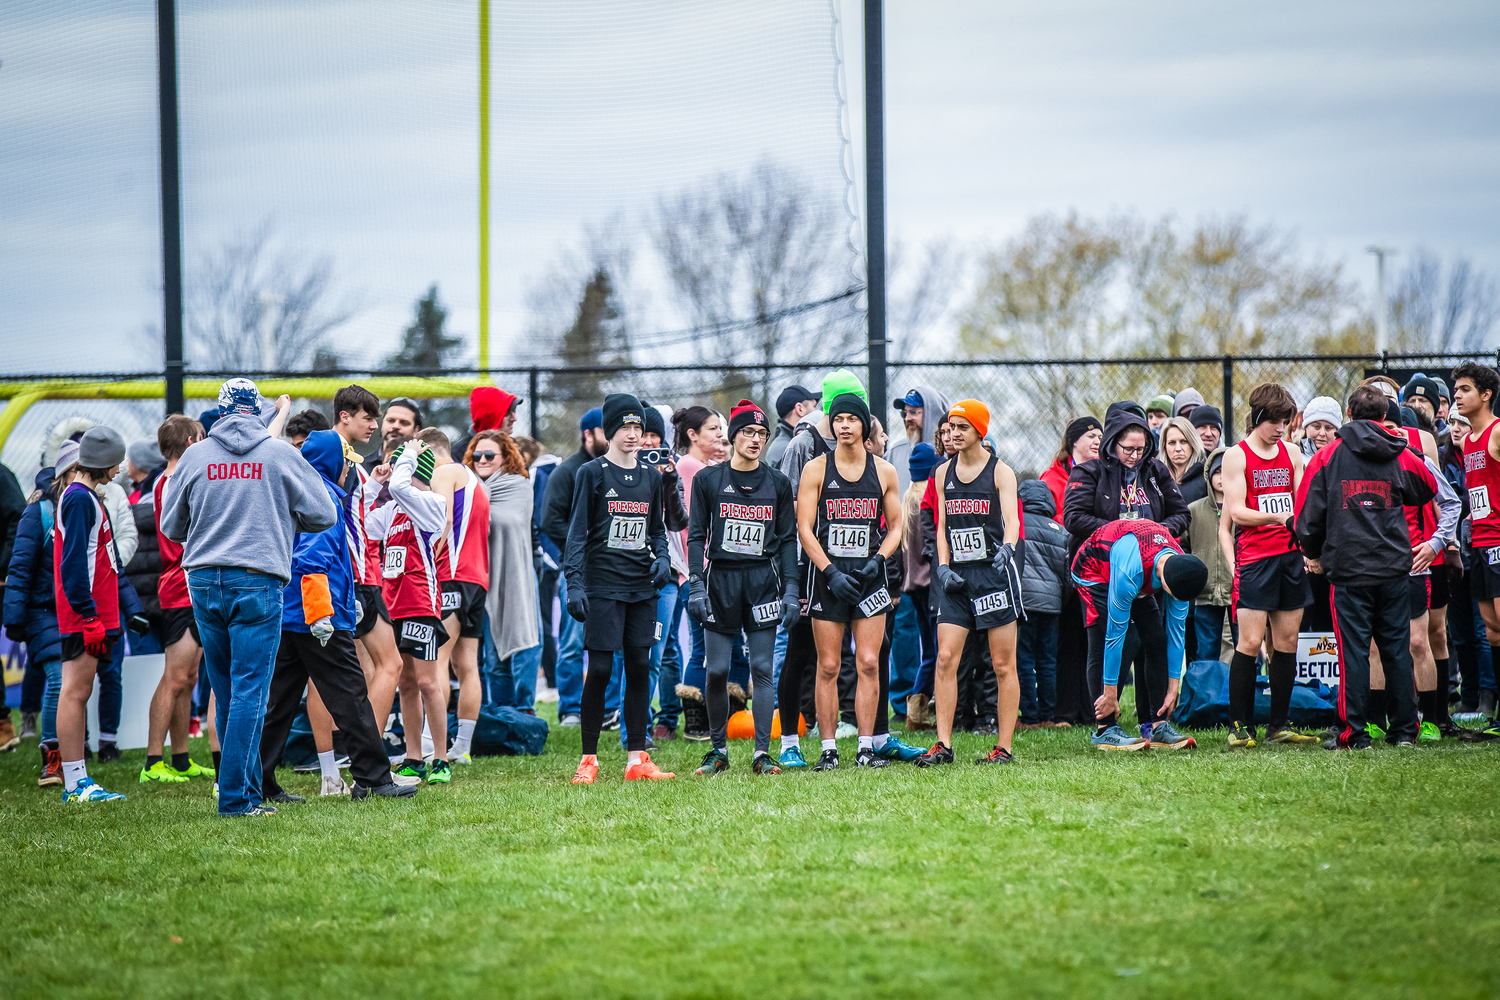 Pierson runners at the starting line of the state cross country championship at Vernon Verona Sherrill High School November 11. REBECCA MCMANUS